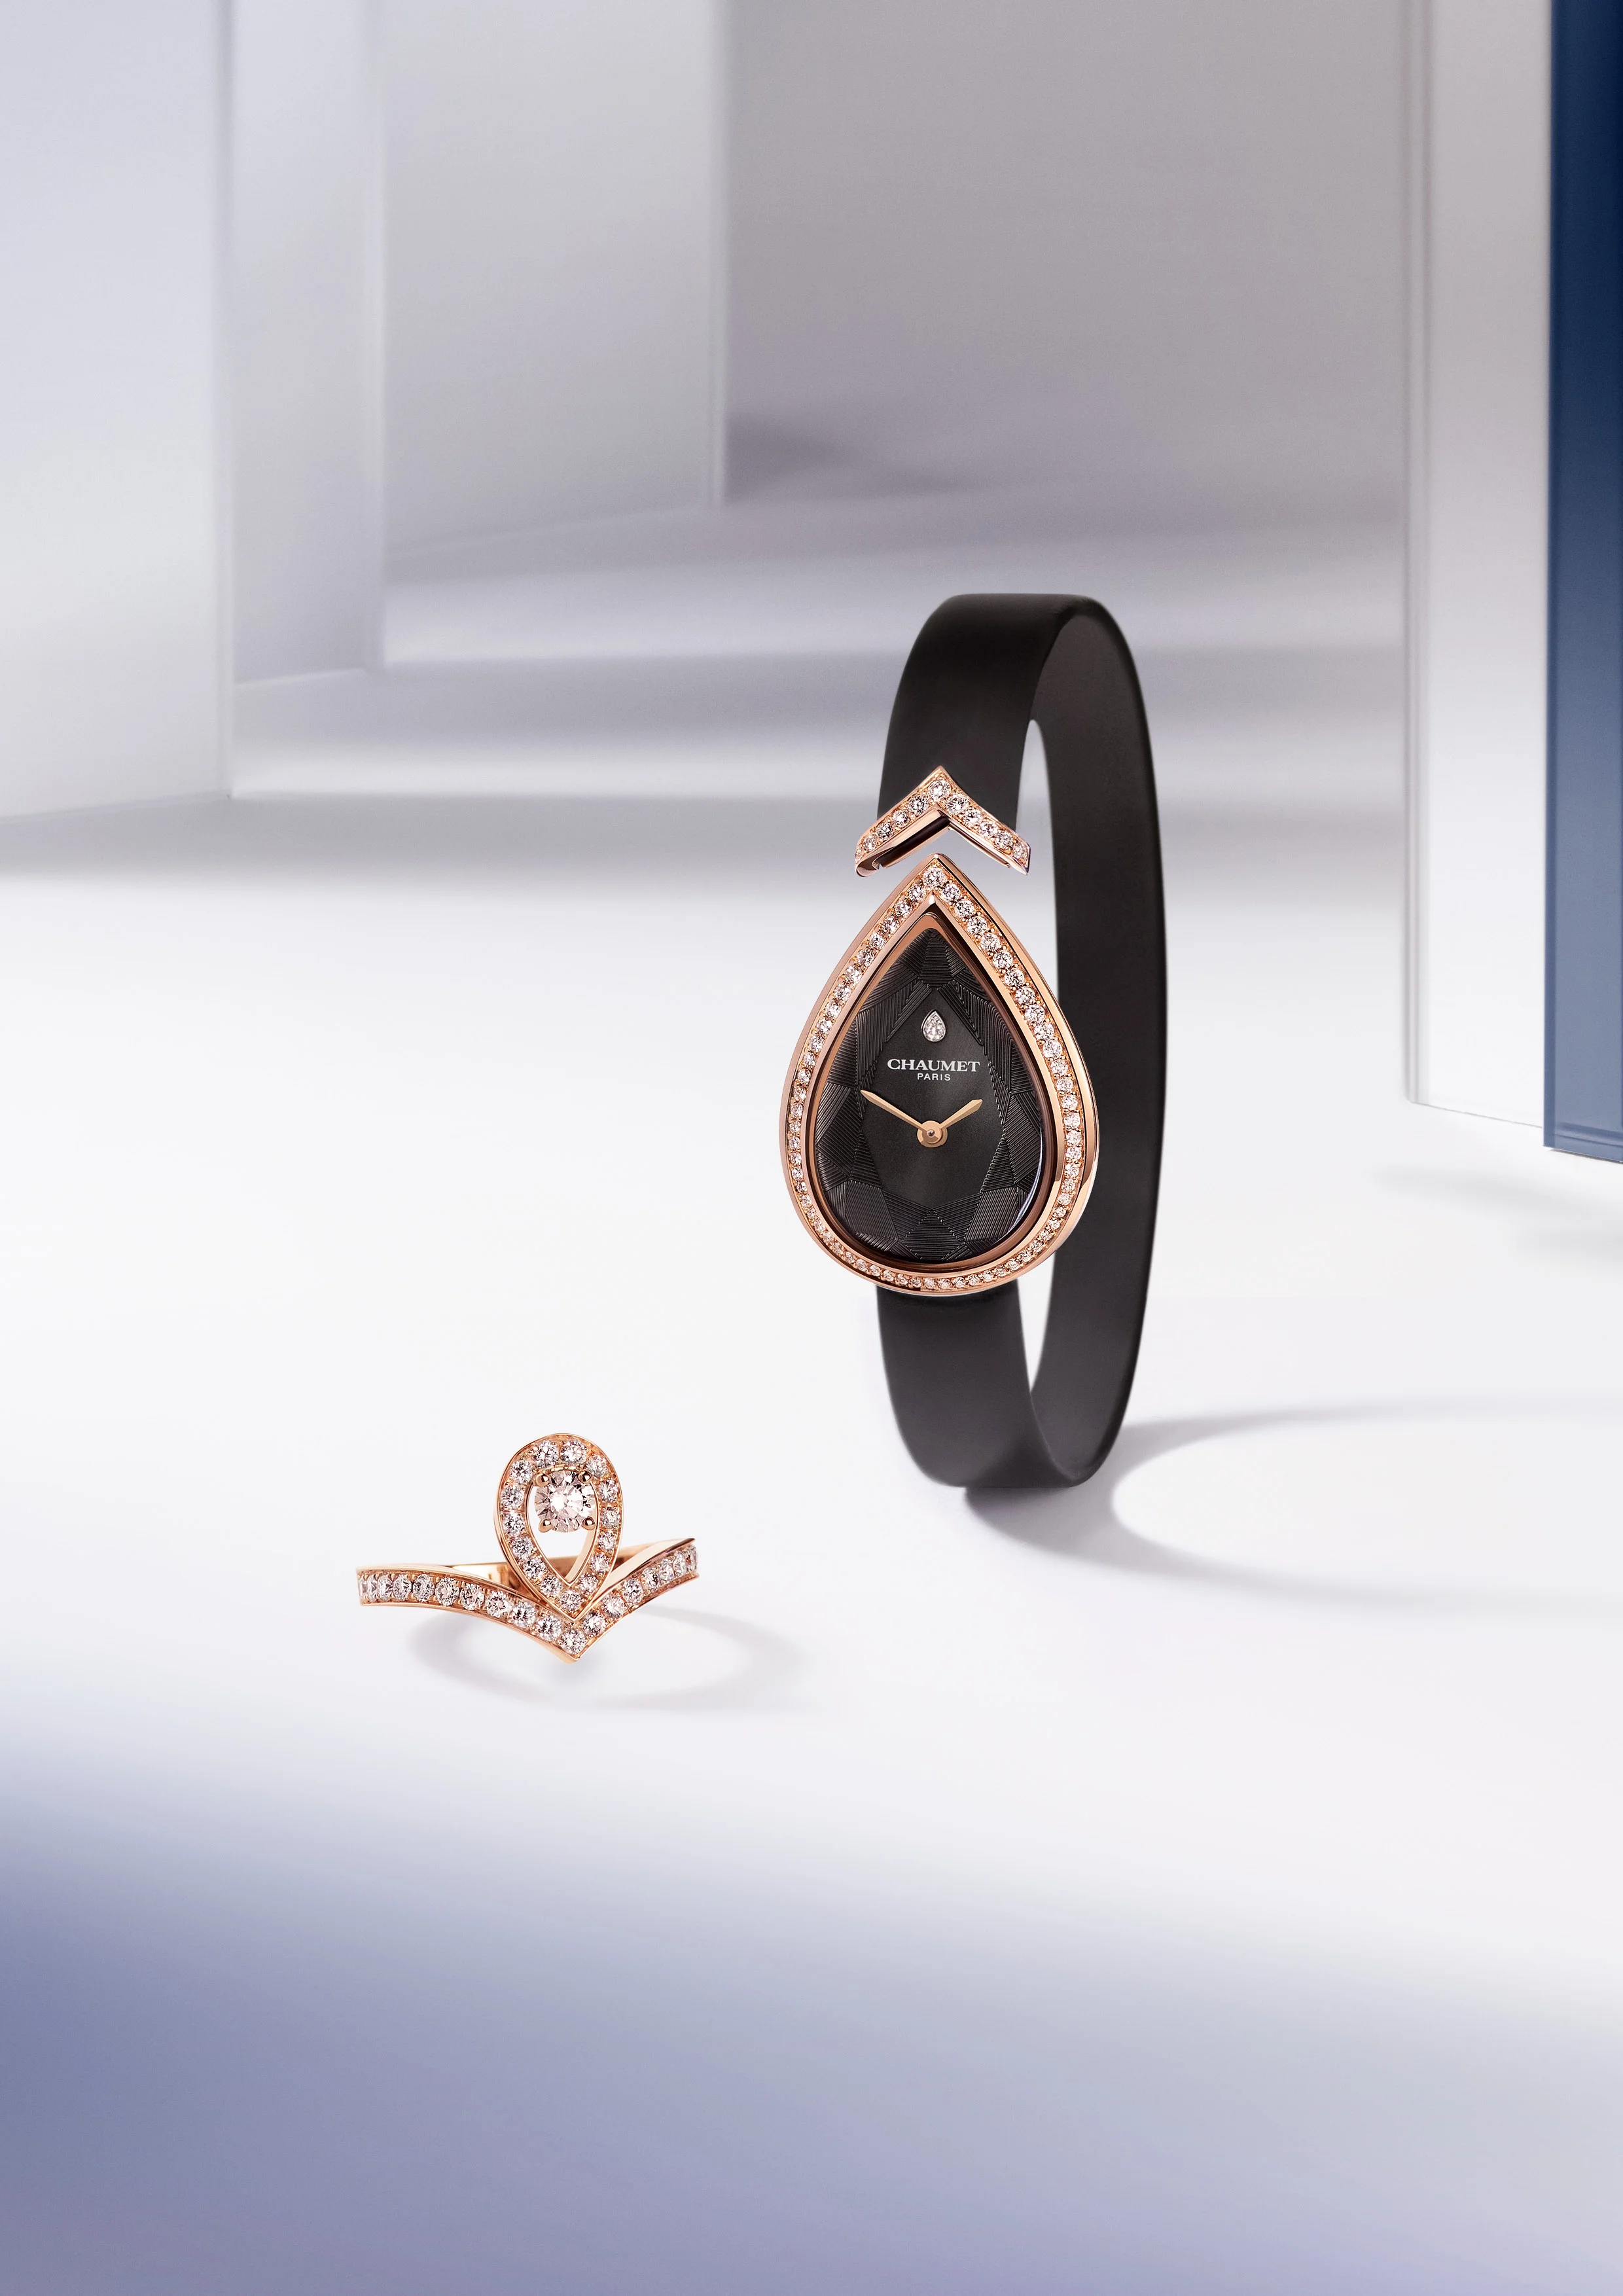 Joséphine Aigrette watch in pink gold case with diamonds and diamond-set aigrette goat leather strap $79,800 Joséphine Aigrette ring in pink gold with diamonds $62,300